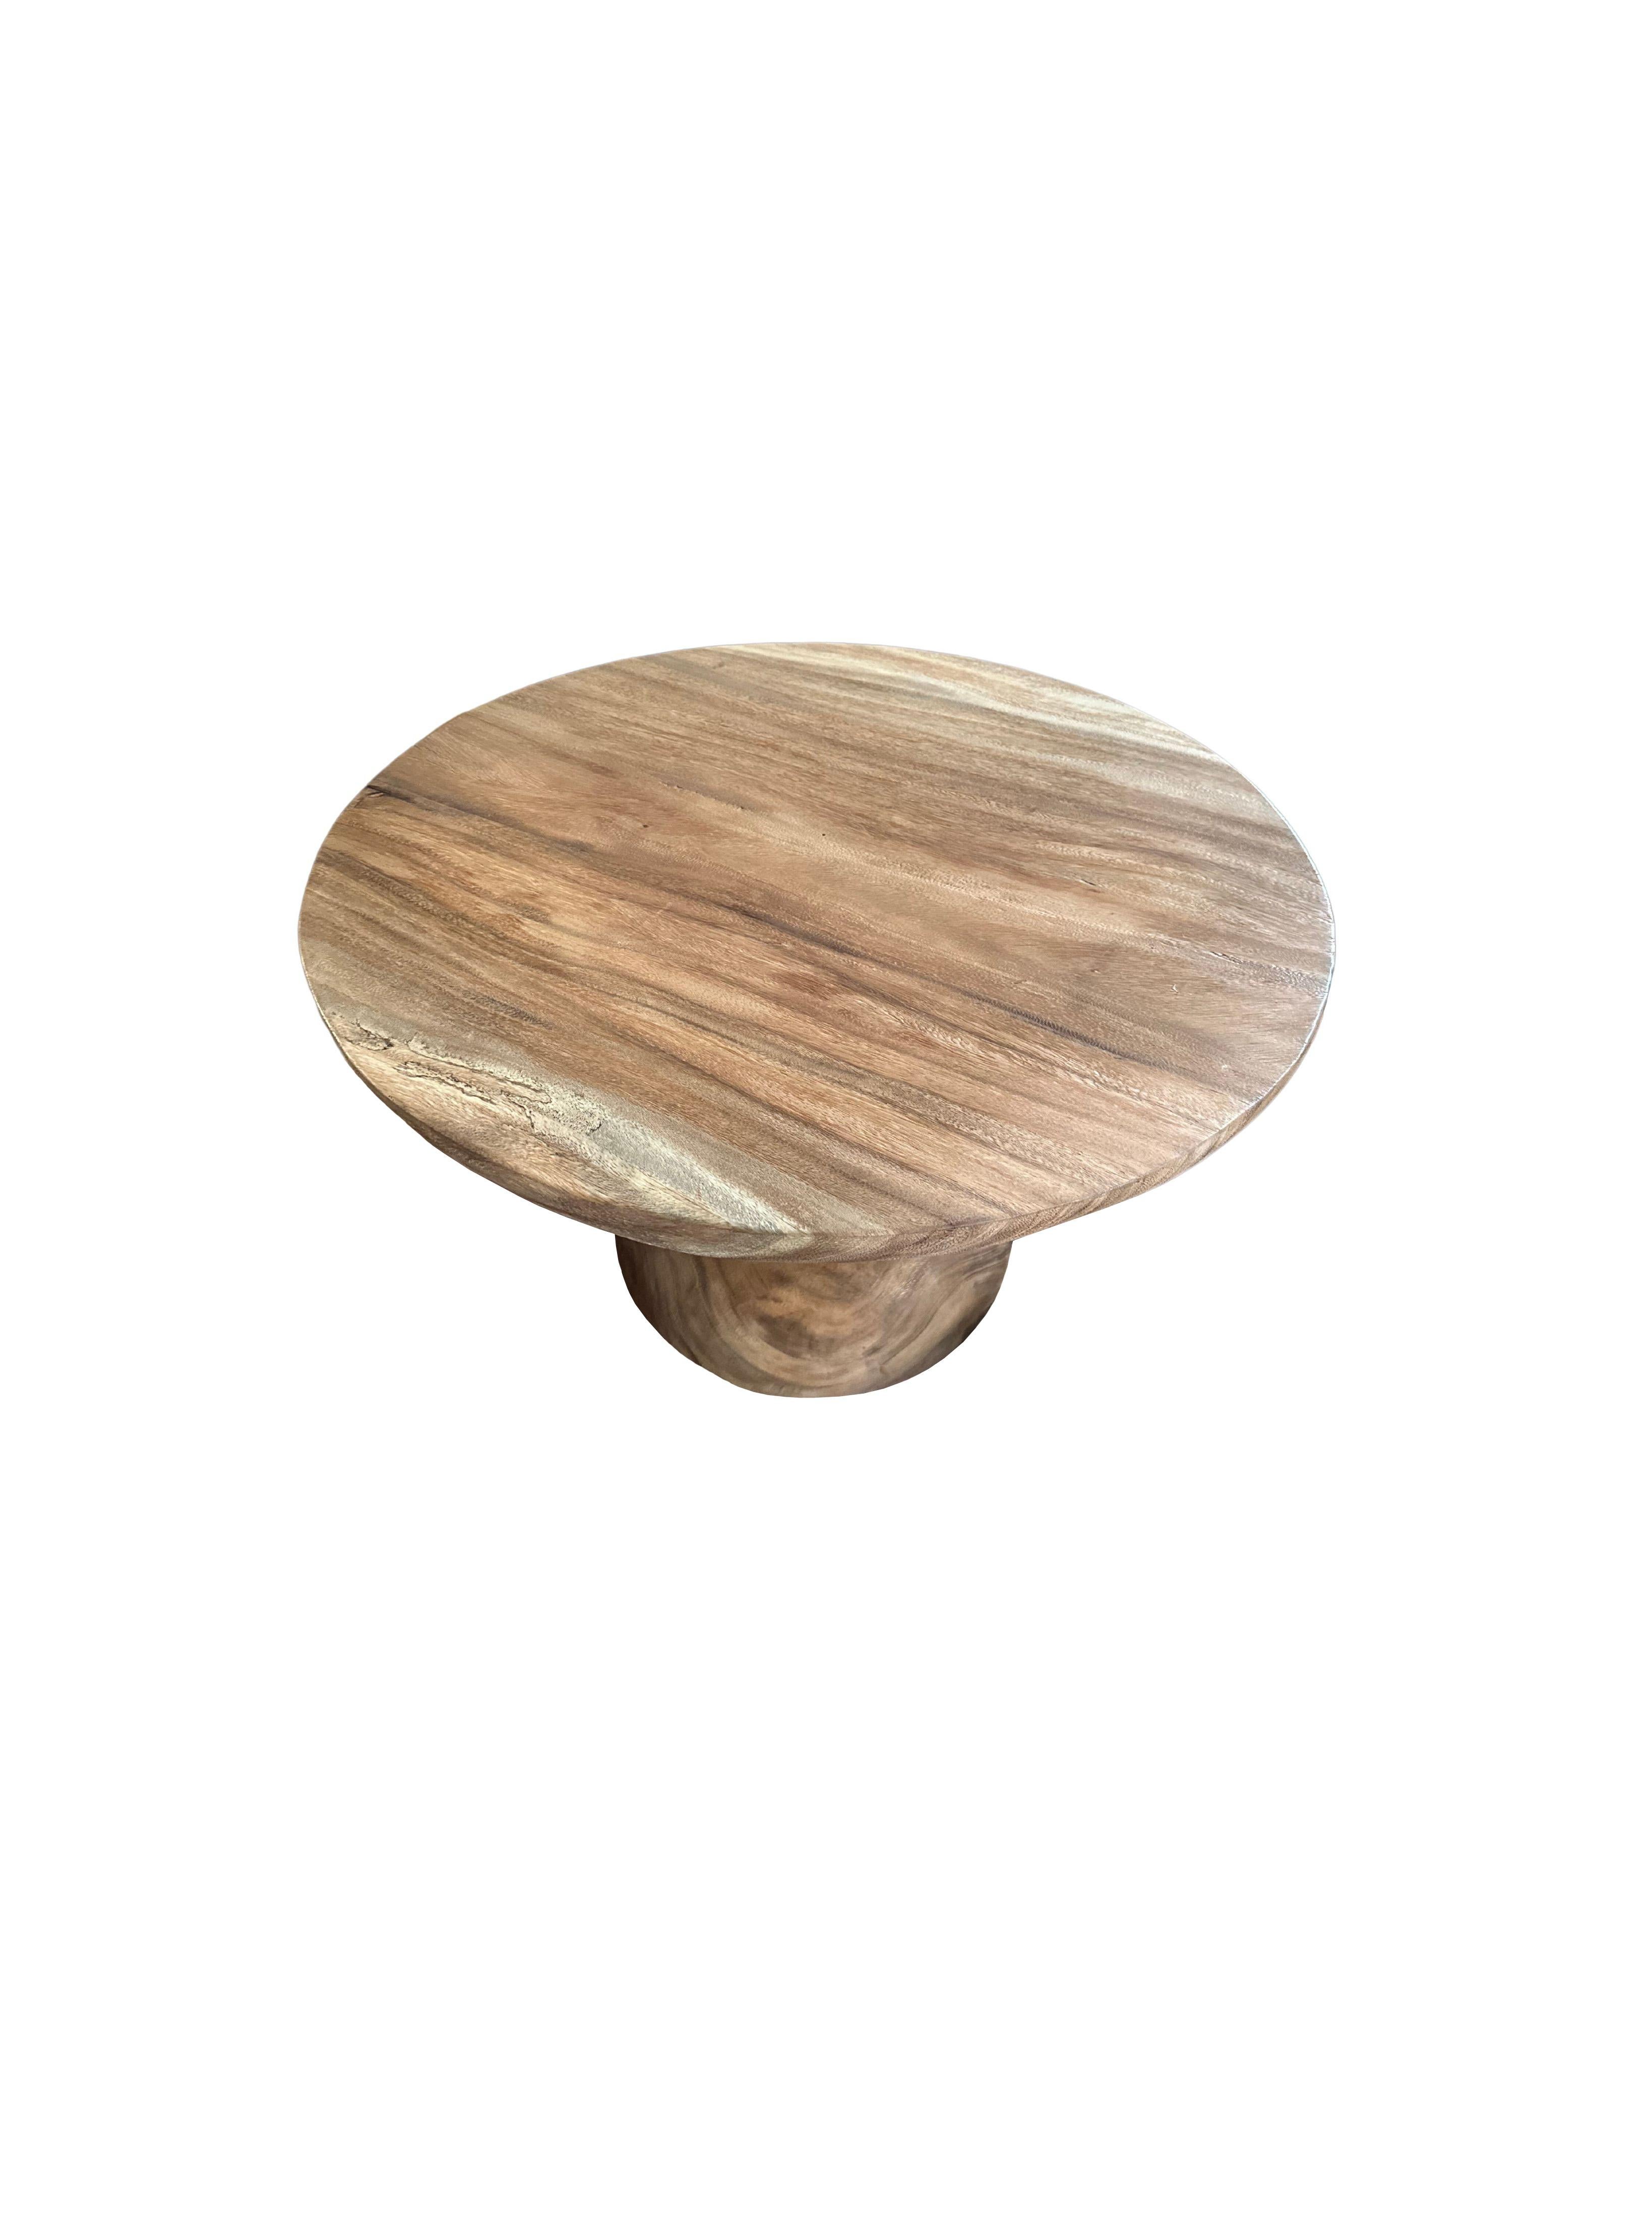 A wonderfully sculptural round side table with a sanded down finish. Its neutral pigment and wood texture makes it perfect for any space. It features a tapered base and large round table top. A uniquely sculptural and versatile piece certain to